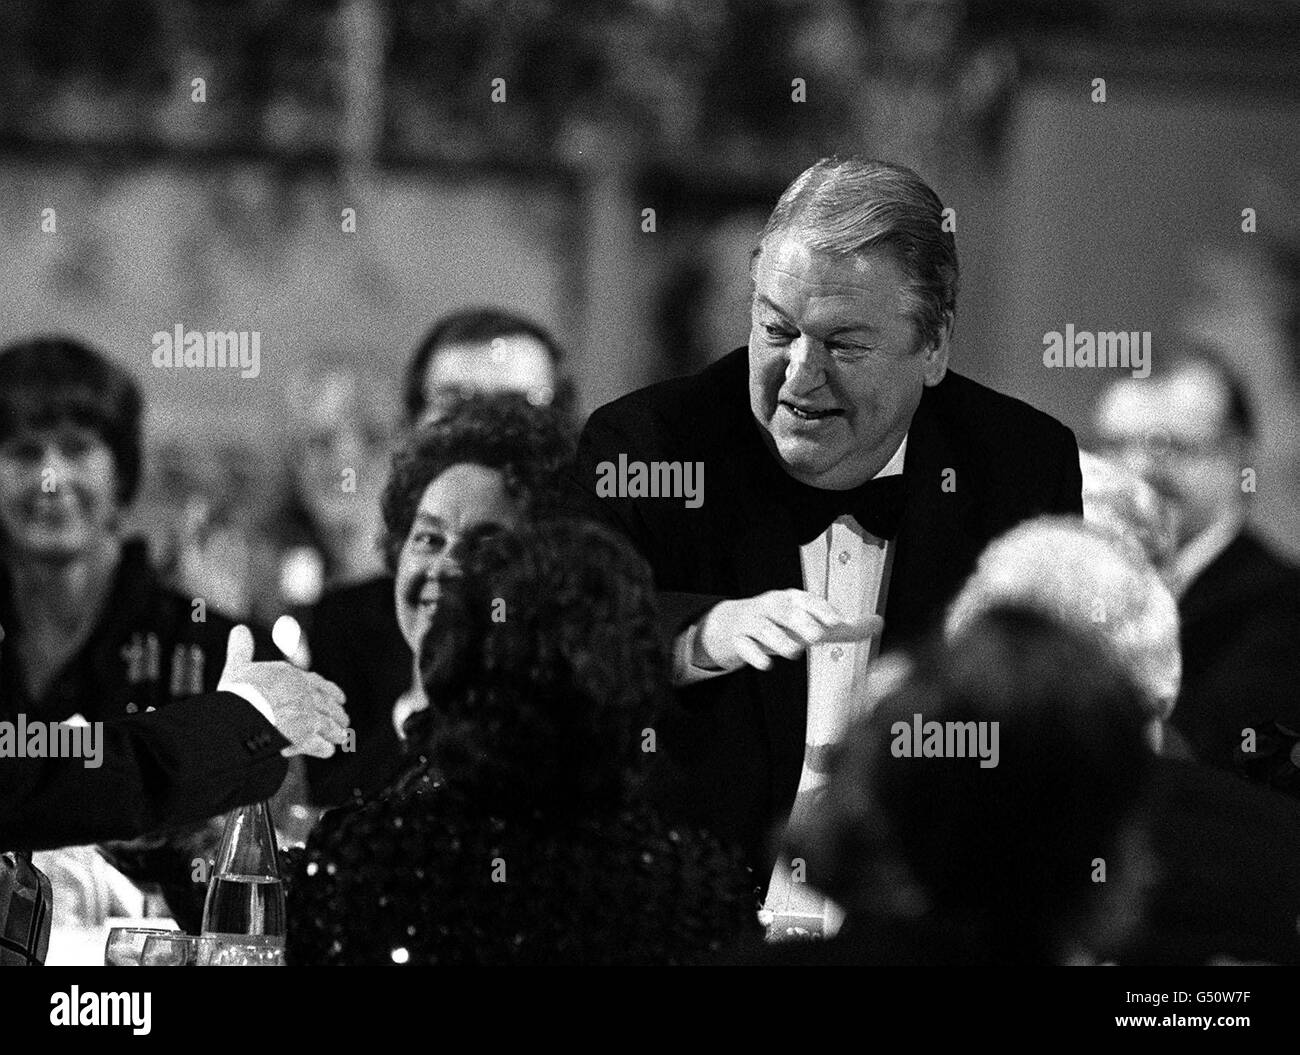 Novelist Kingsley Amis surrounded by well-wishers at the Booker Prize presentation dinner at the Guildhall, London, where he was announced the winner of the 15,000 literary prize for his book The Old Devils. Stock Photo